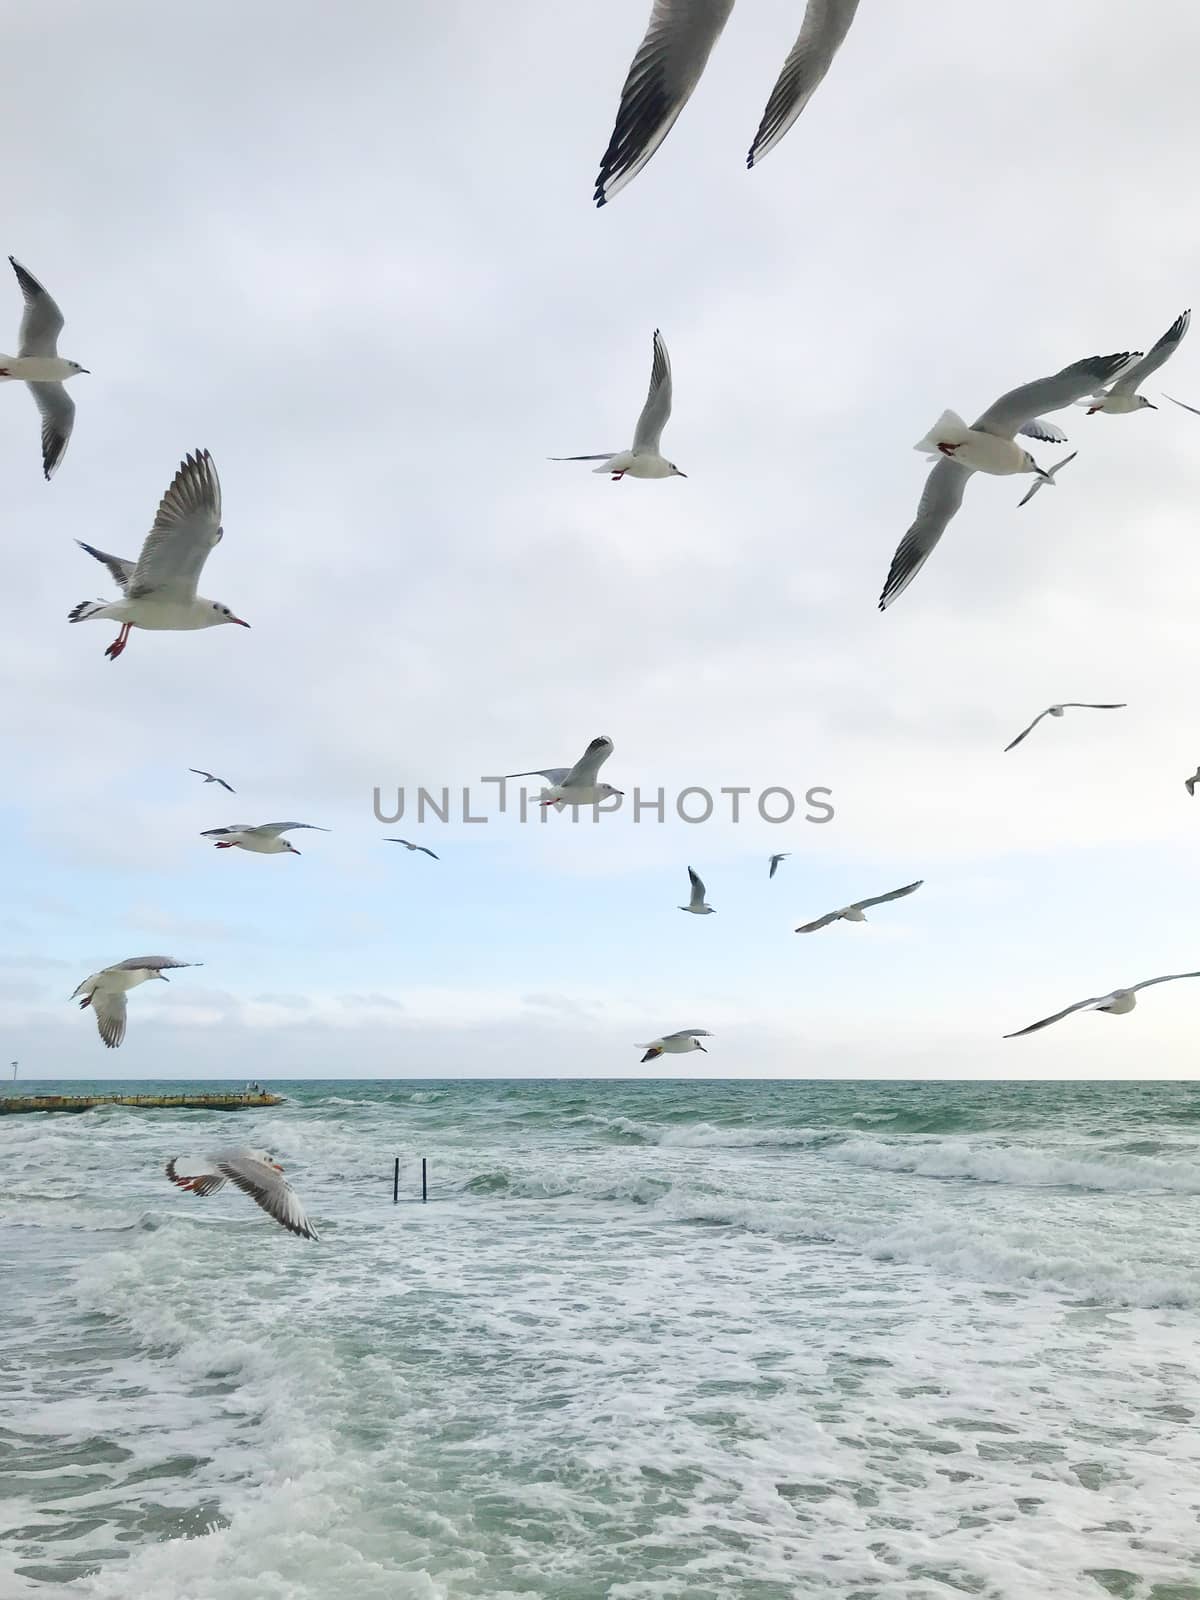 Seagulls Flying Over Sea by nenovbrothers